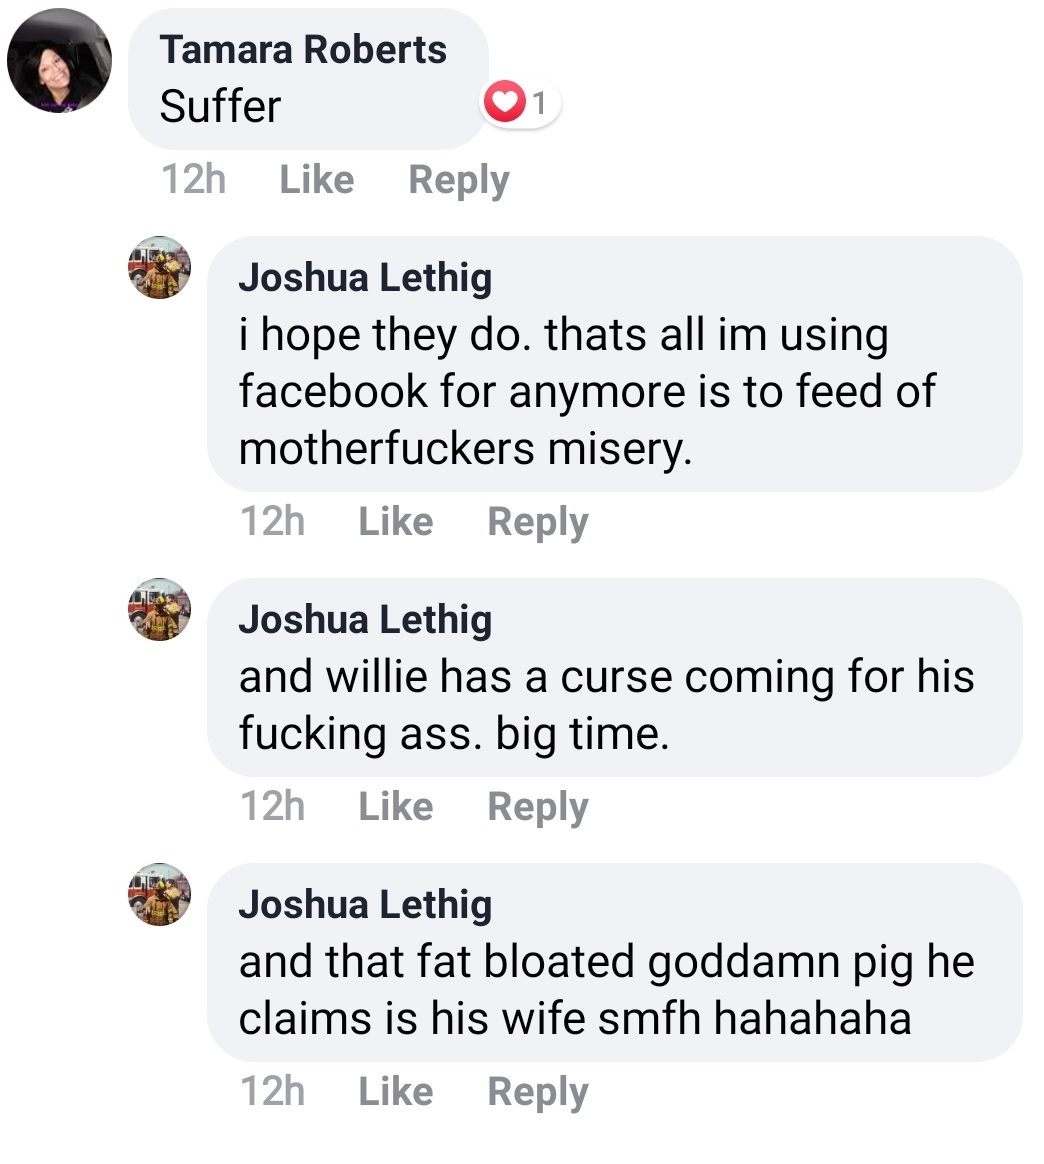 document - 1 Tamara Roberts Suffer 12h Joshua Lethig i hope they do. thats all im using facebook for anymore is to feed of motherfuckers misery. 12h Joshua Lethig and willie has a curse coming for his fucking ass. big time. 12h Joshua Lethig and that fat 